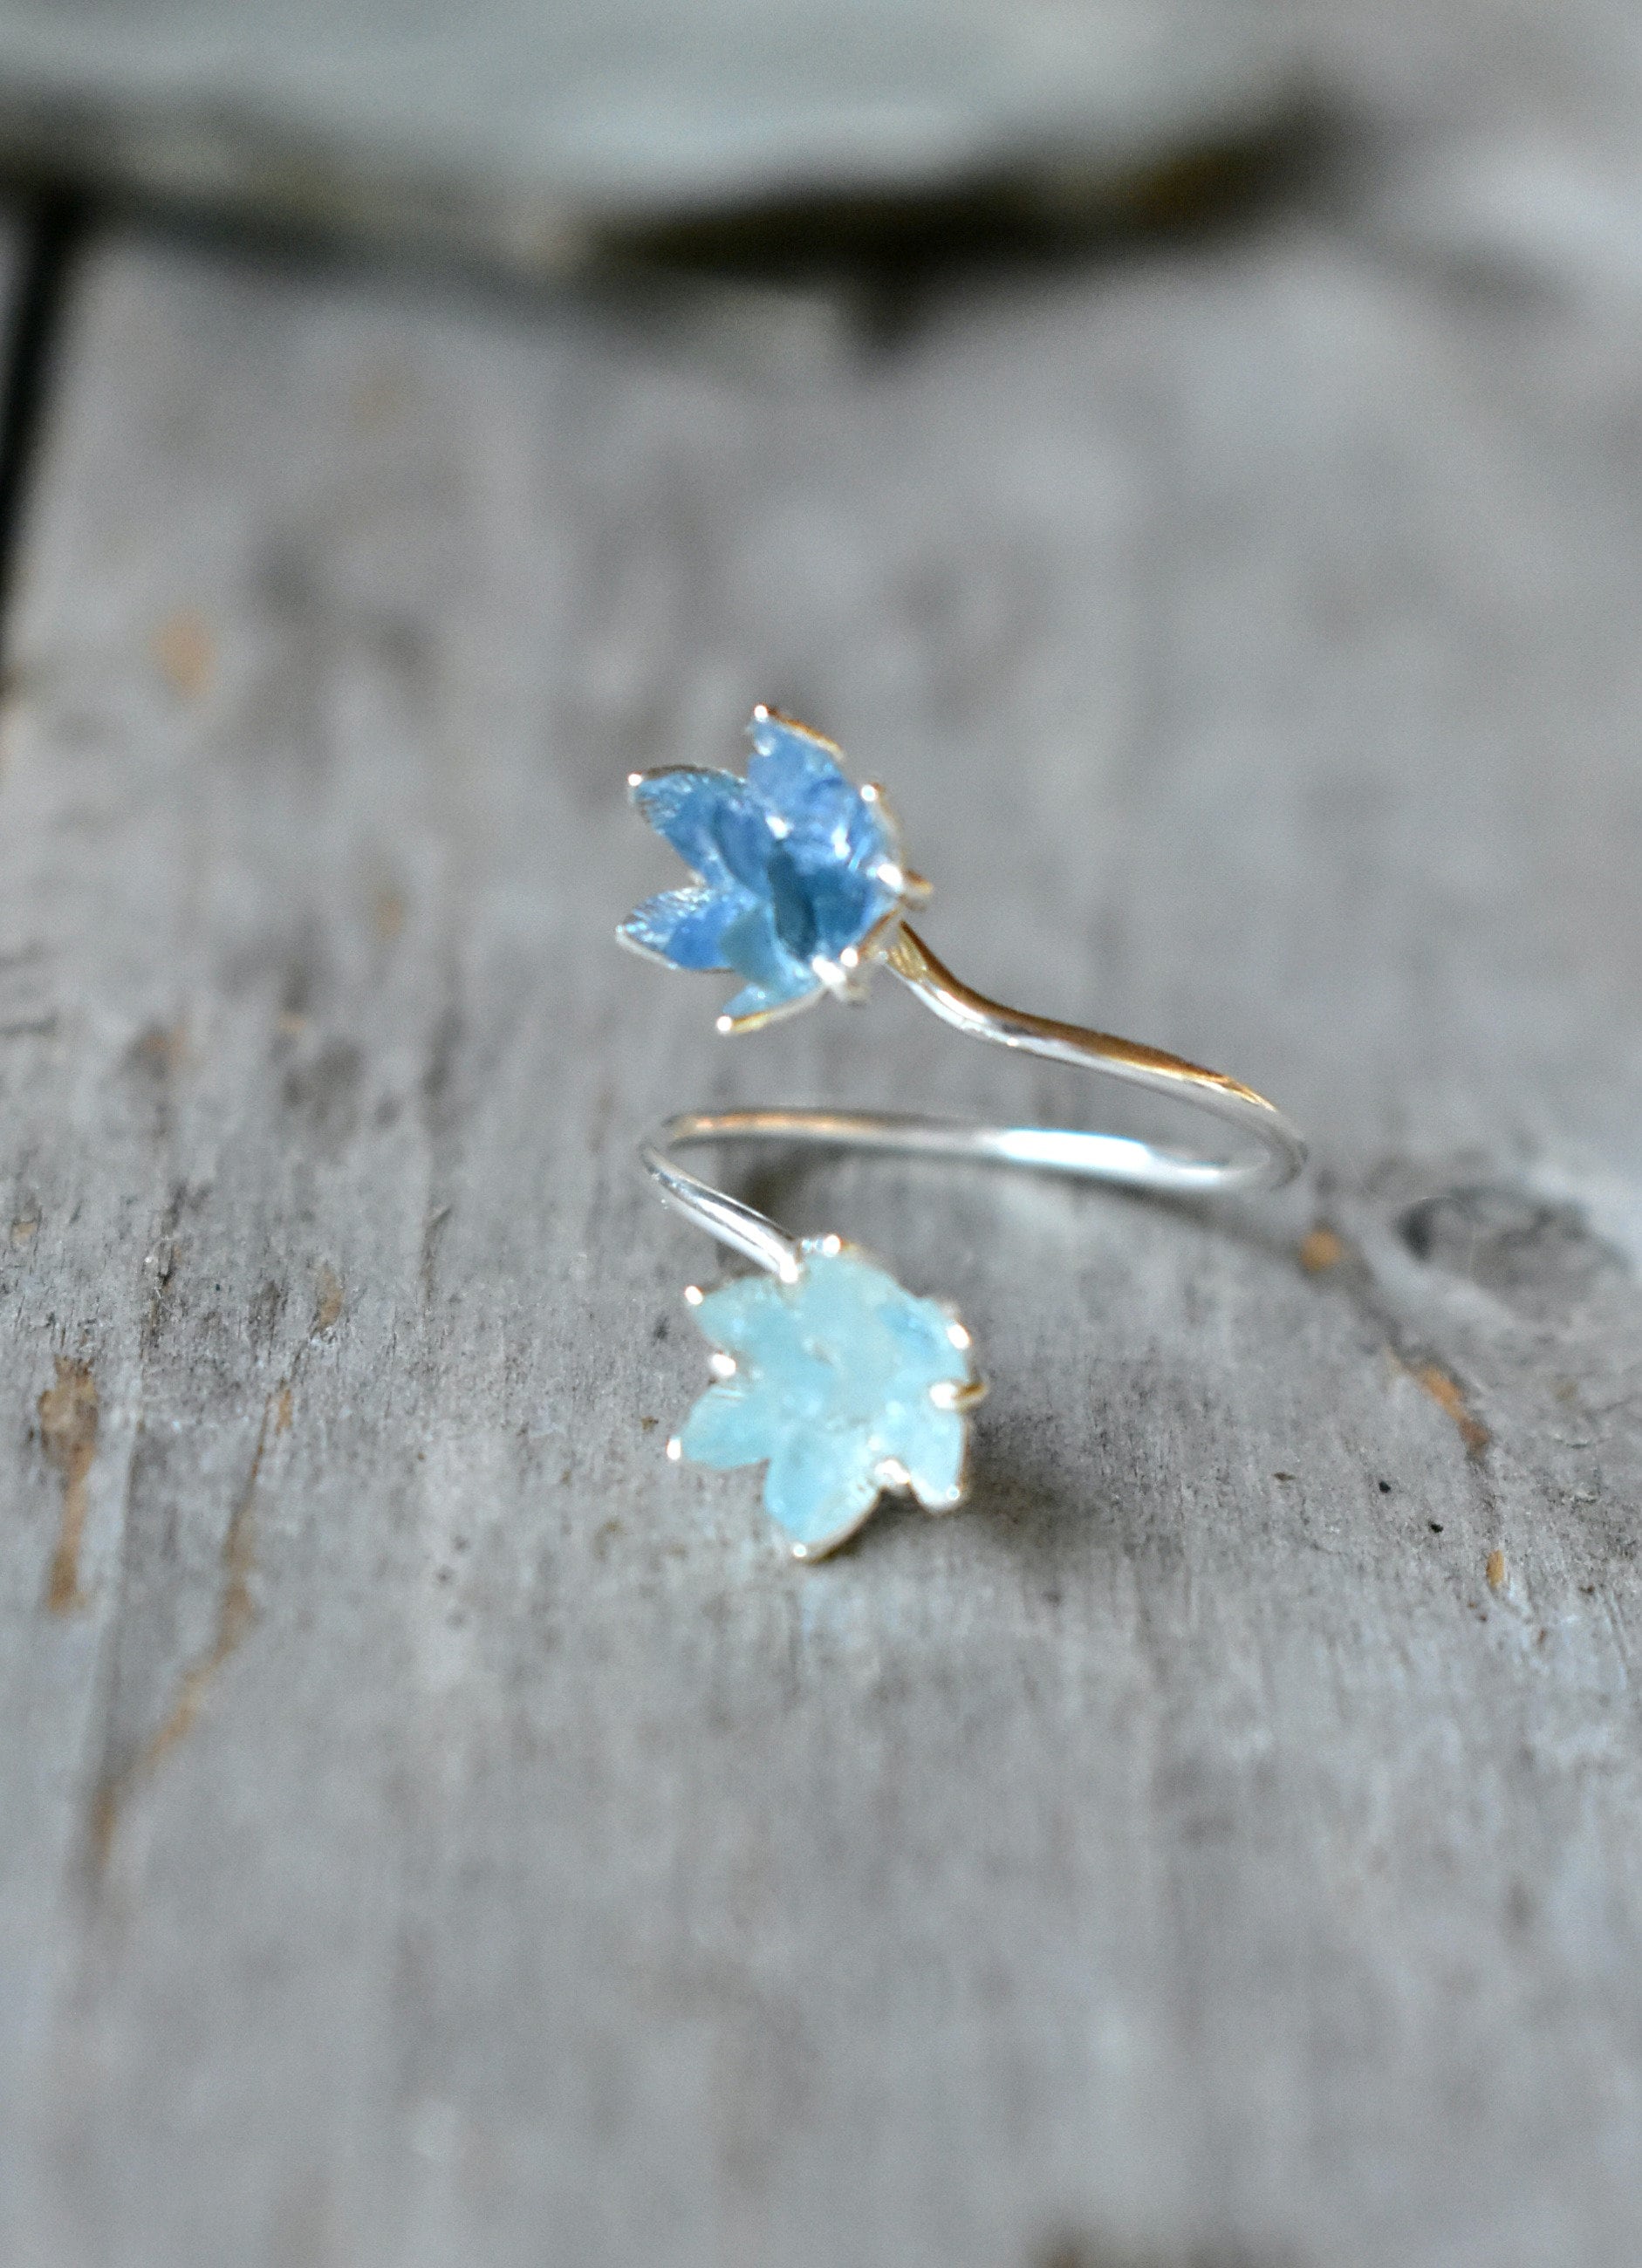 Unique Aquamarine & Sapphire Ring, Lotus Flower Mother's Ring in Silver, Uncut Gemstone Engagement Band, Double Floral Ring Flower Cuff Ring